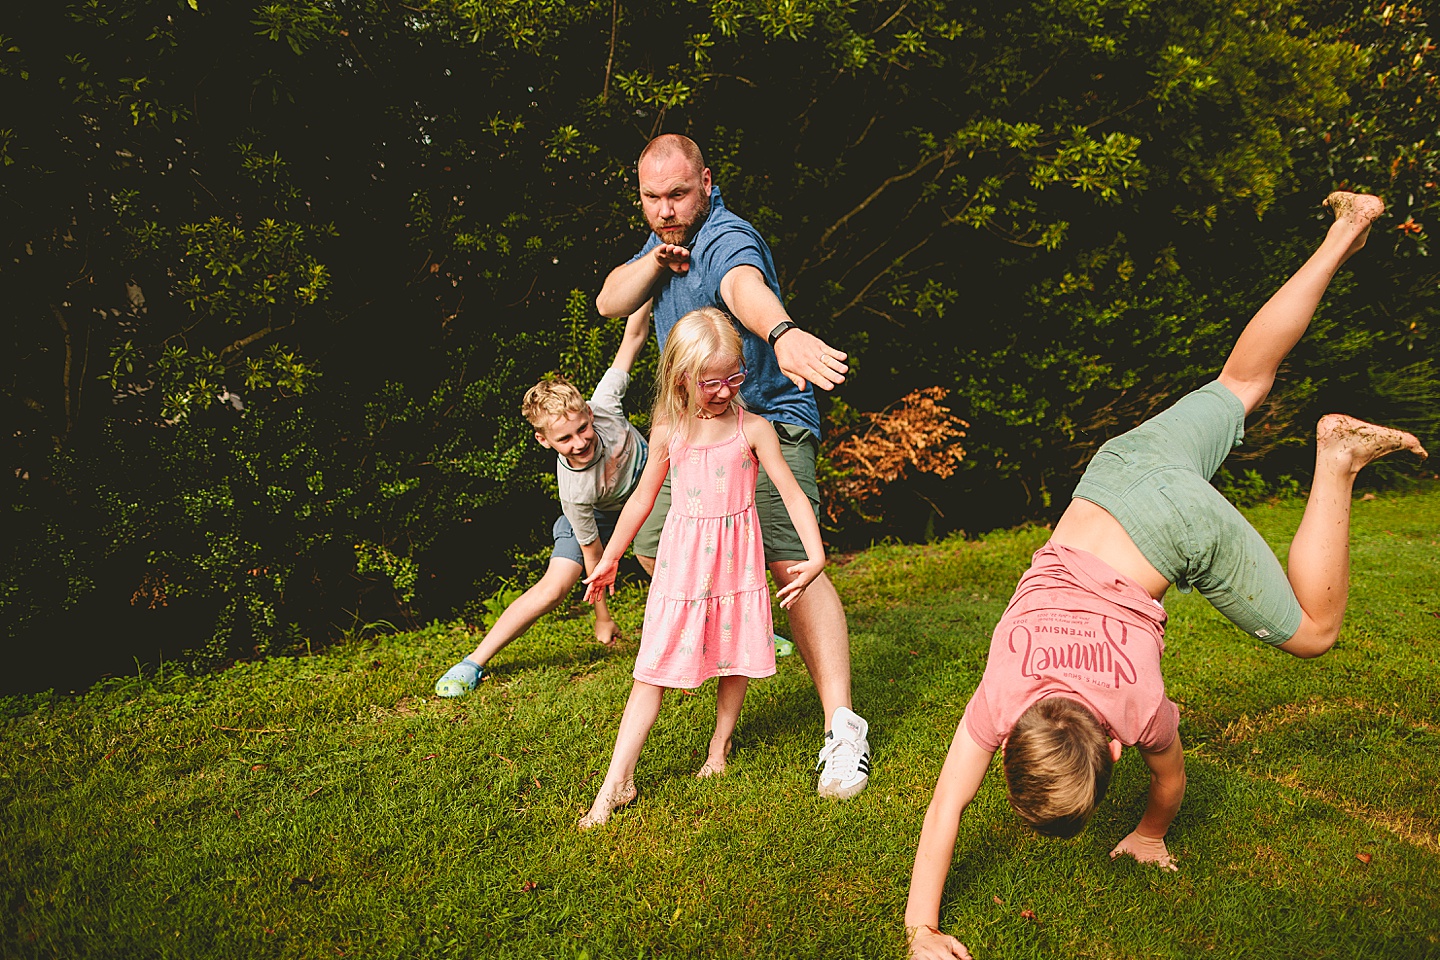 Wake Forest Family Photographer